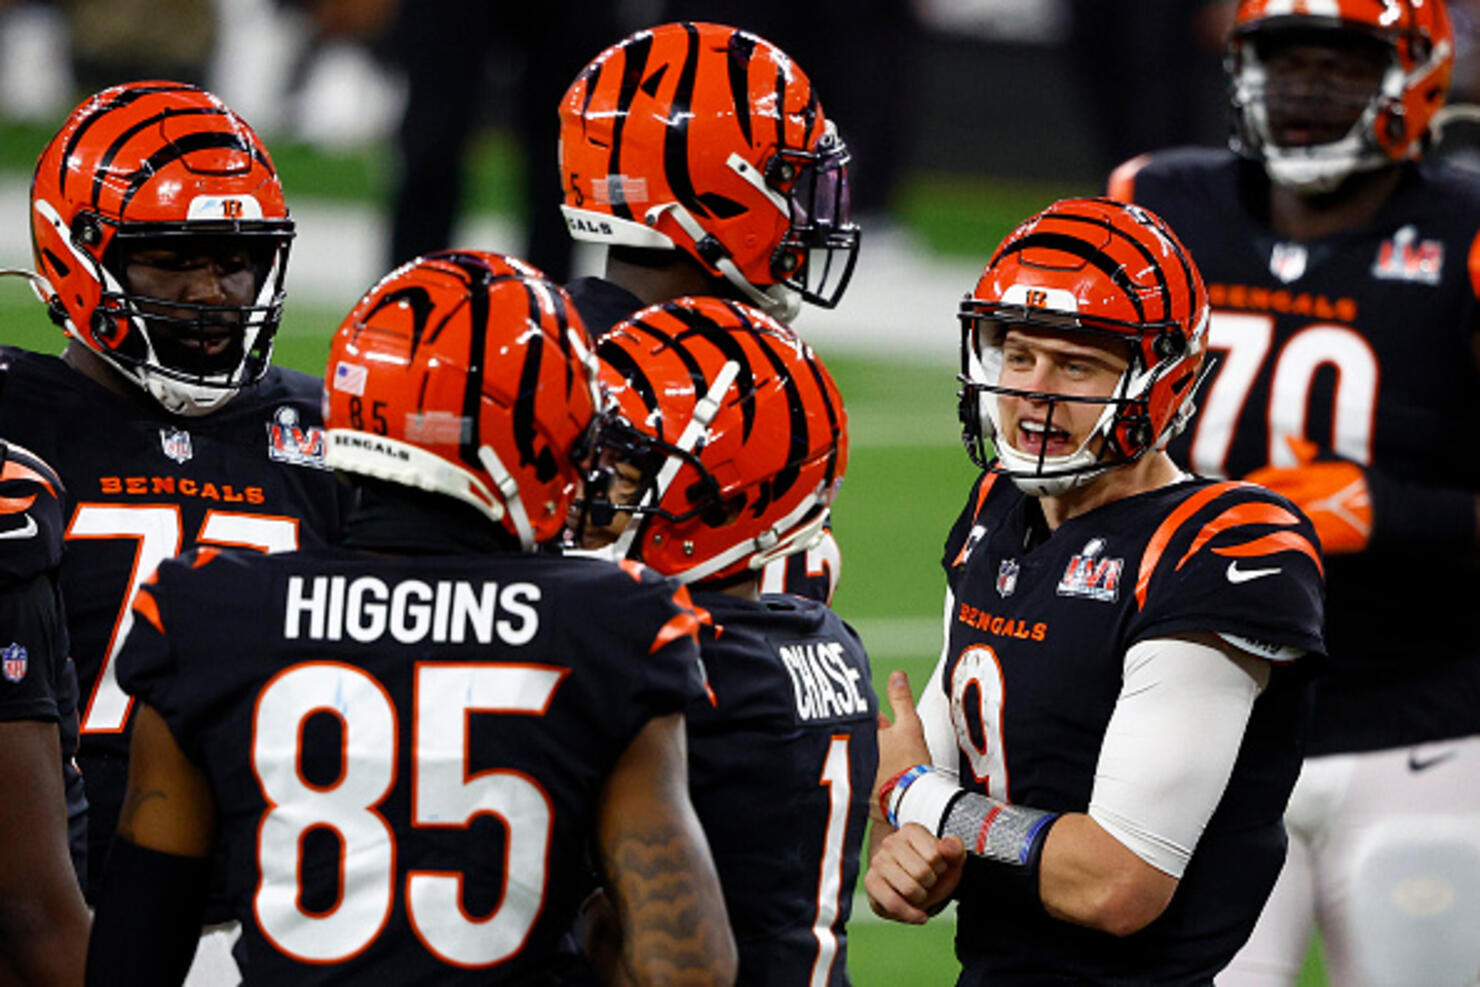 The Bengals schedule is out: Five primetime games